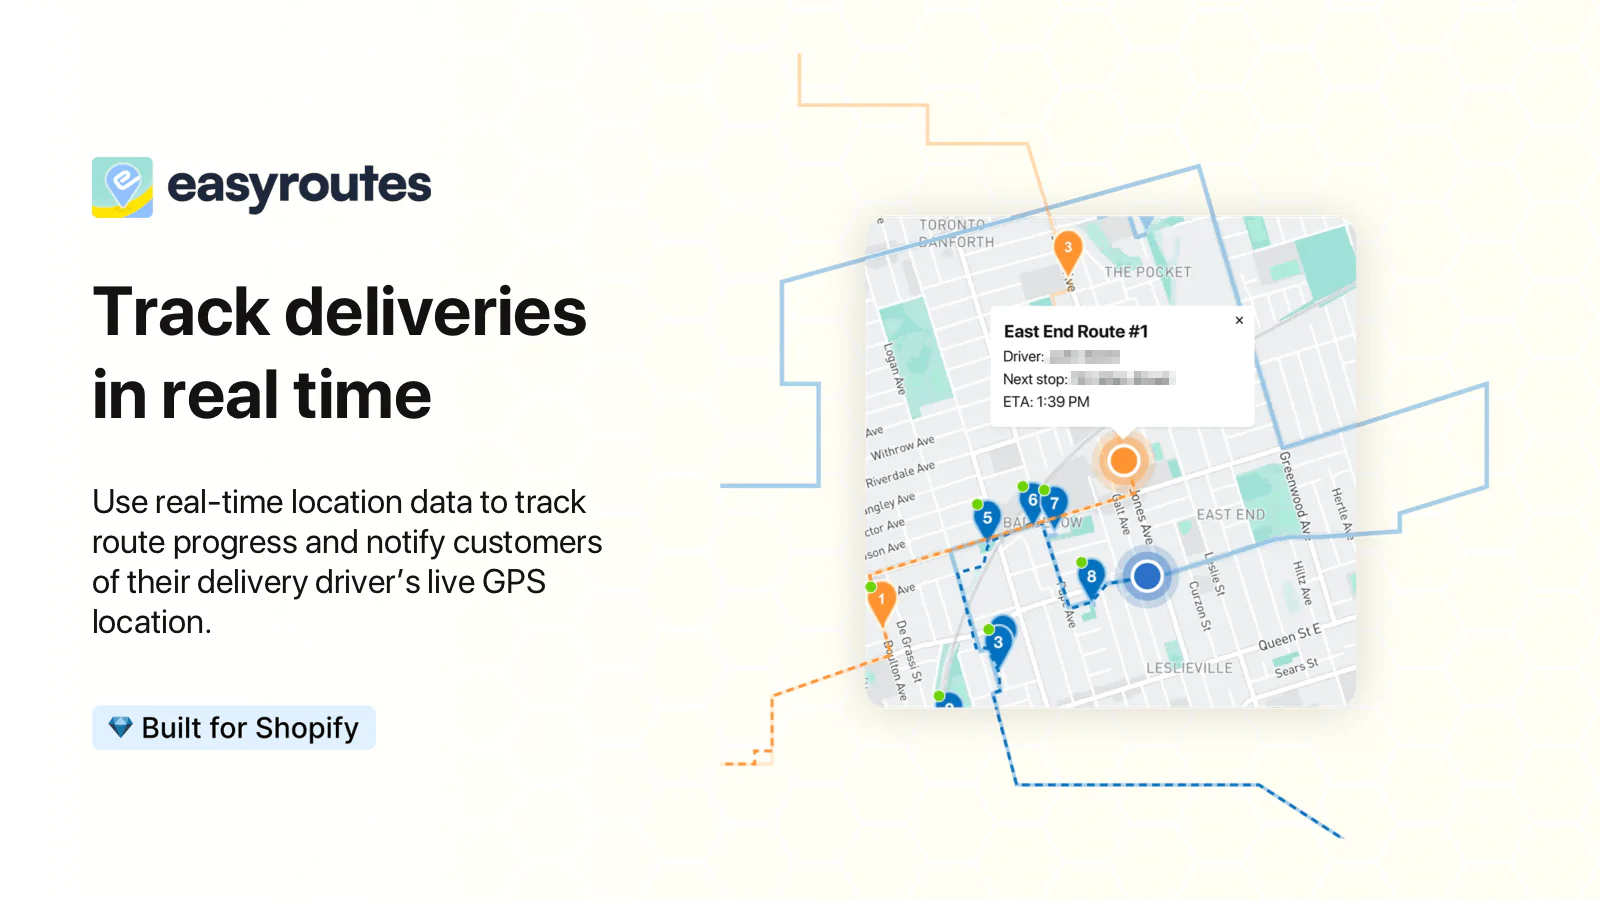 EasyRoutes Track deliveries in real time